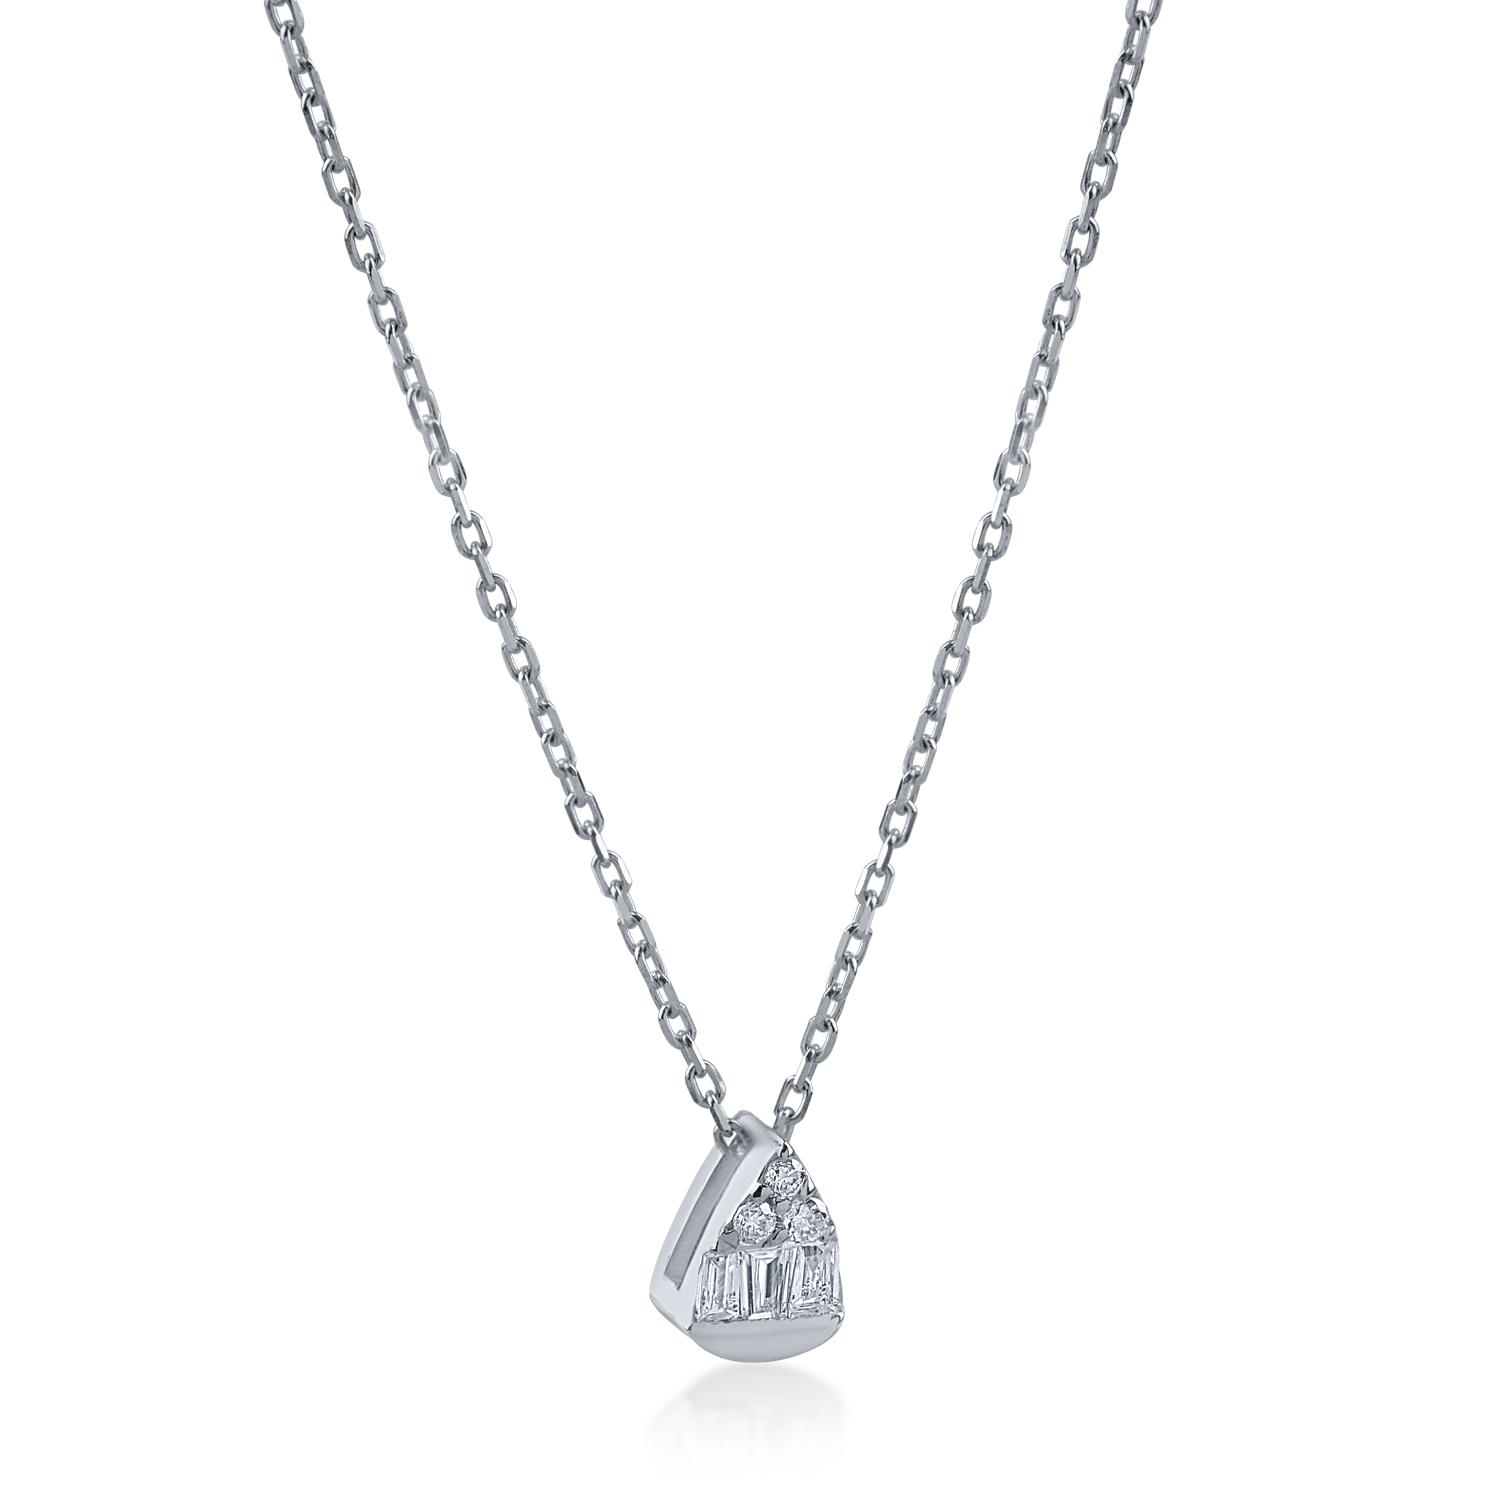 White gold pendant necklace with 0.08ct diamonds